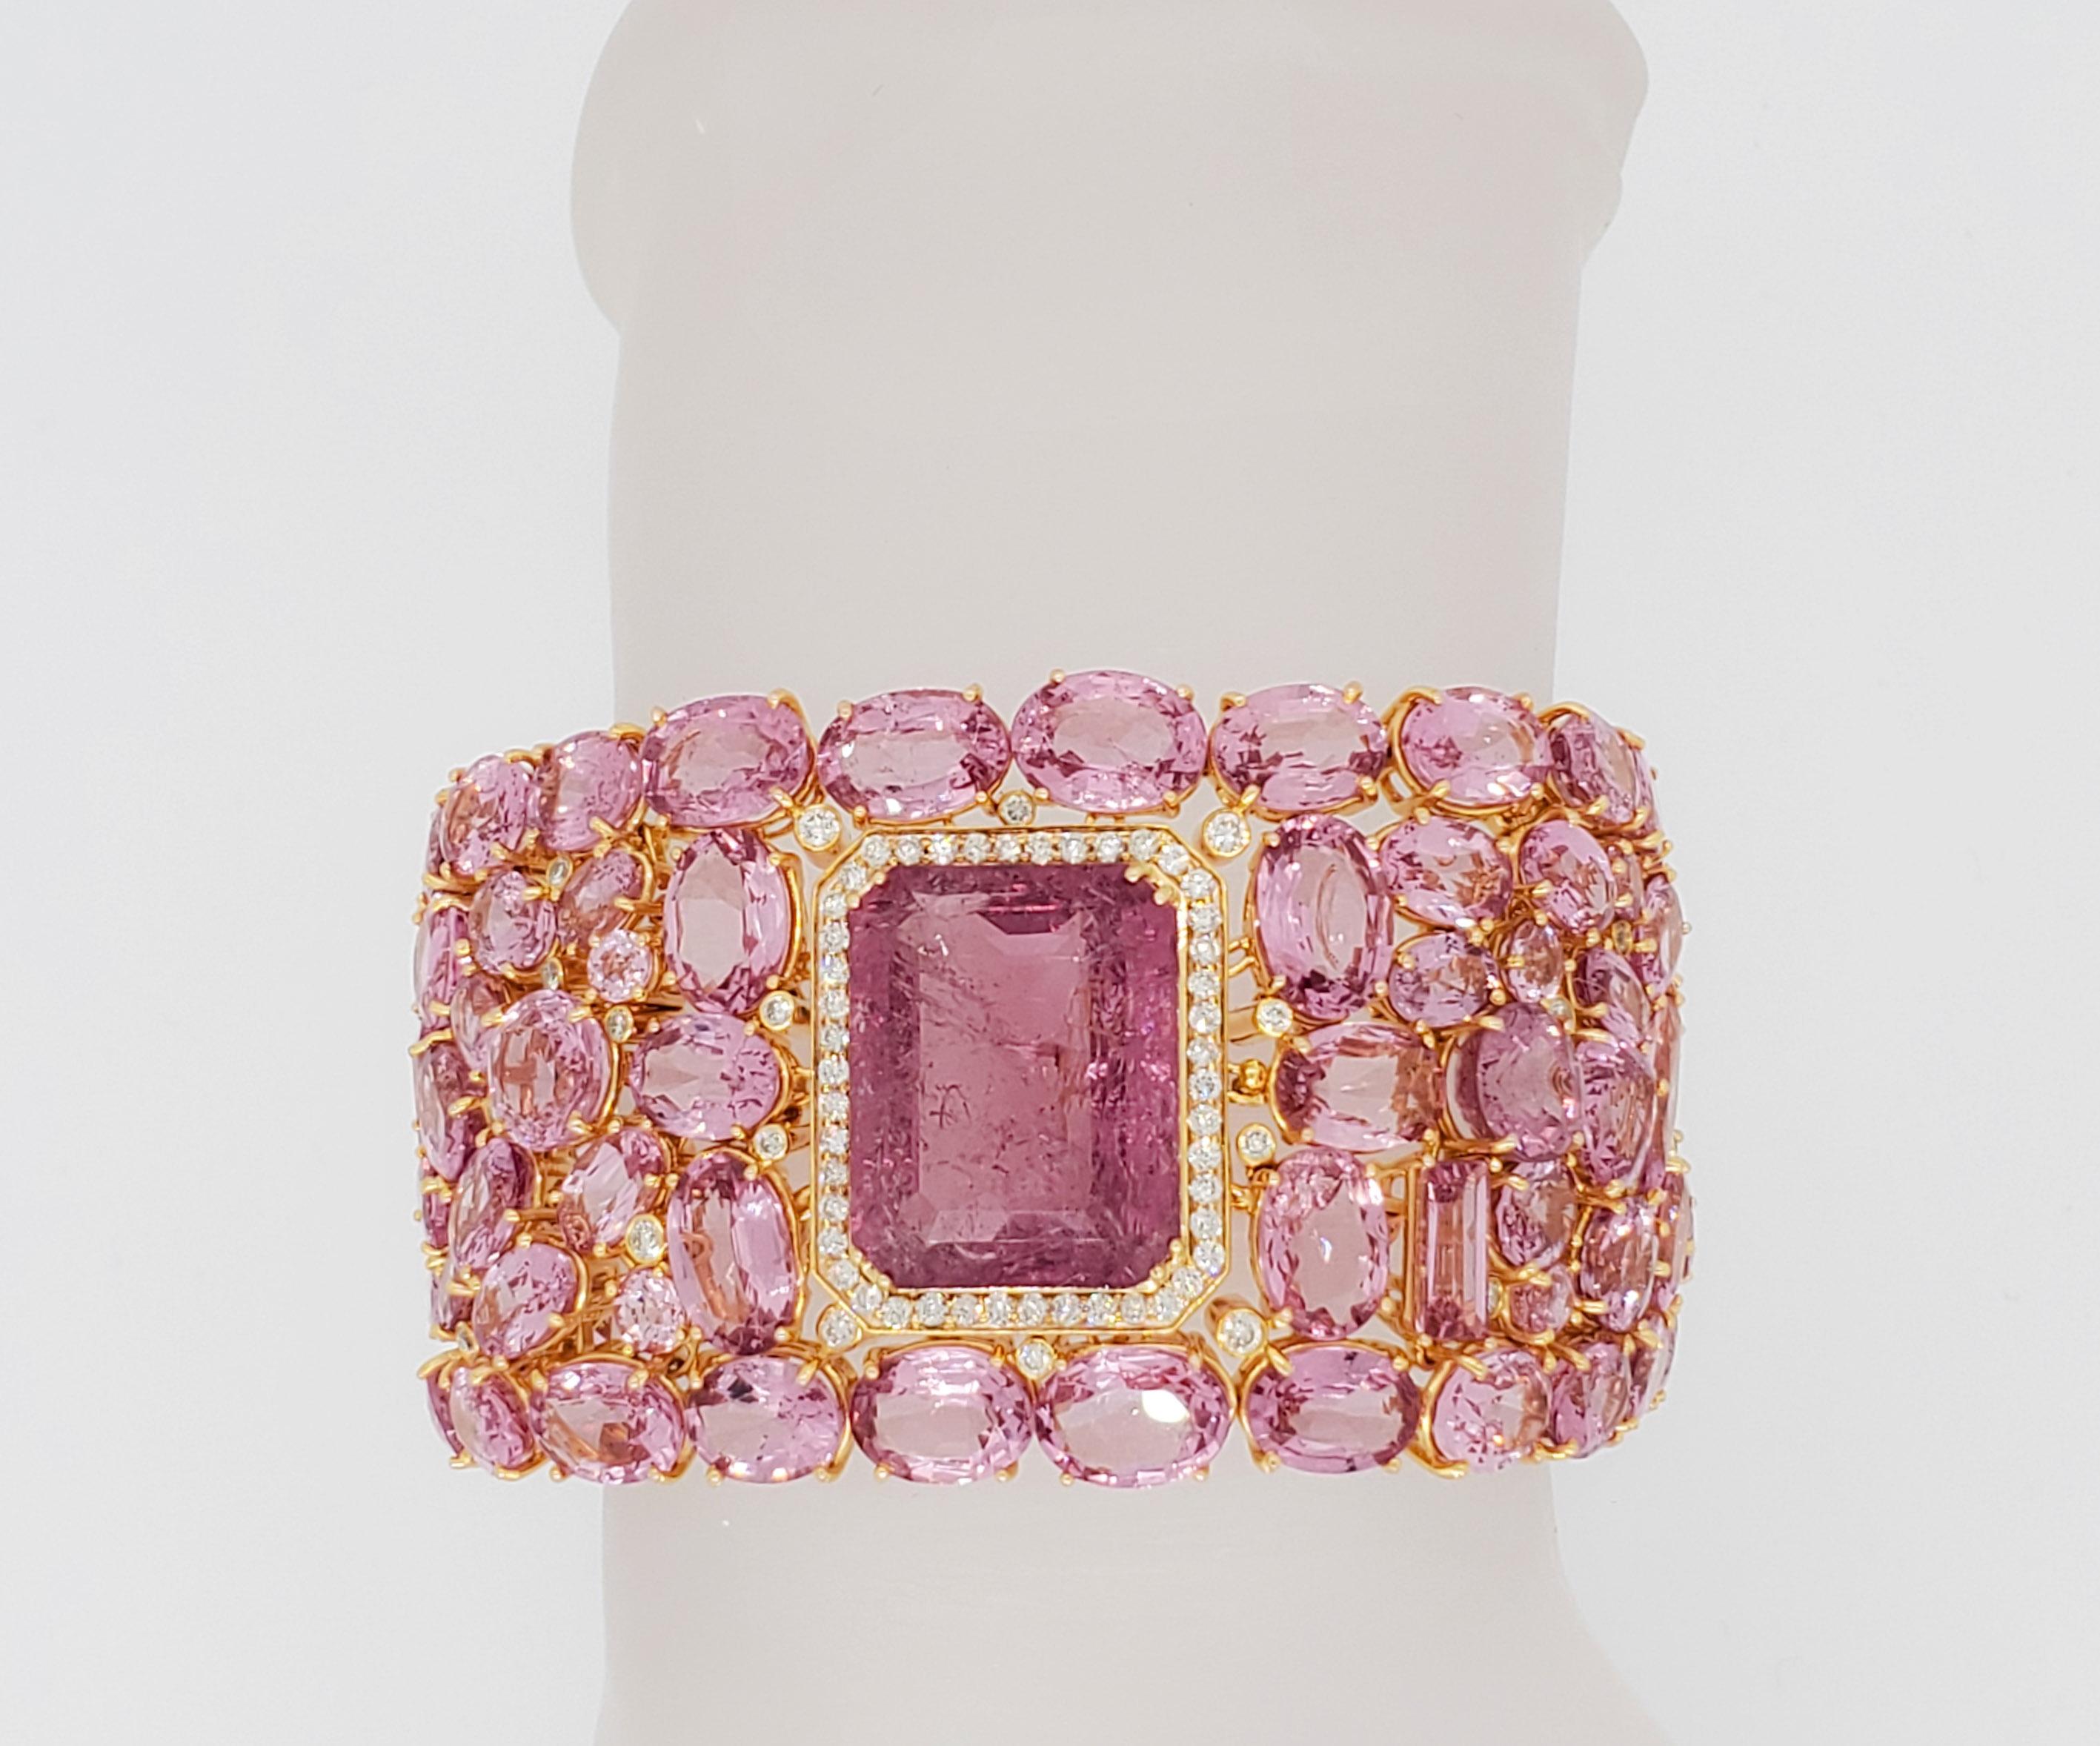 Absolutely gorgeous 25.16 ct. pink spinel emerald cut with 127.62 ct. pink spinel ovals, rounds, and emerald cuts.  White diamond scattered throughout.  Handmade in 18k yellow gold.  Total of 116 stones.